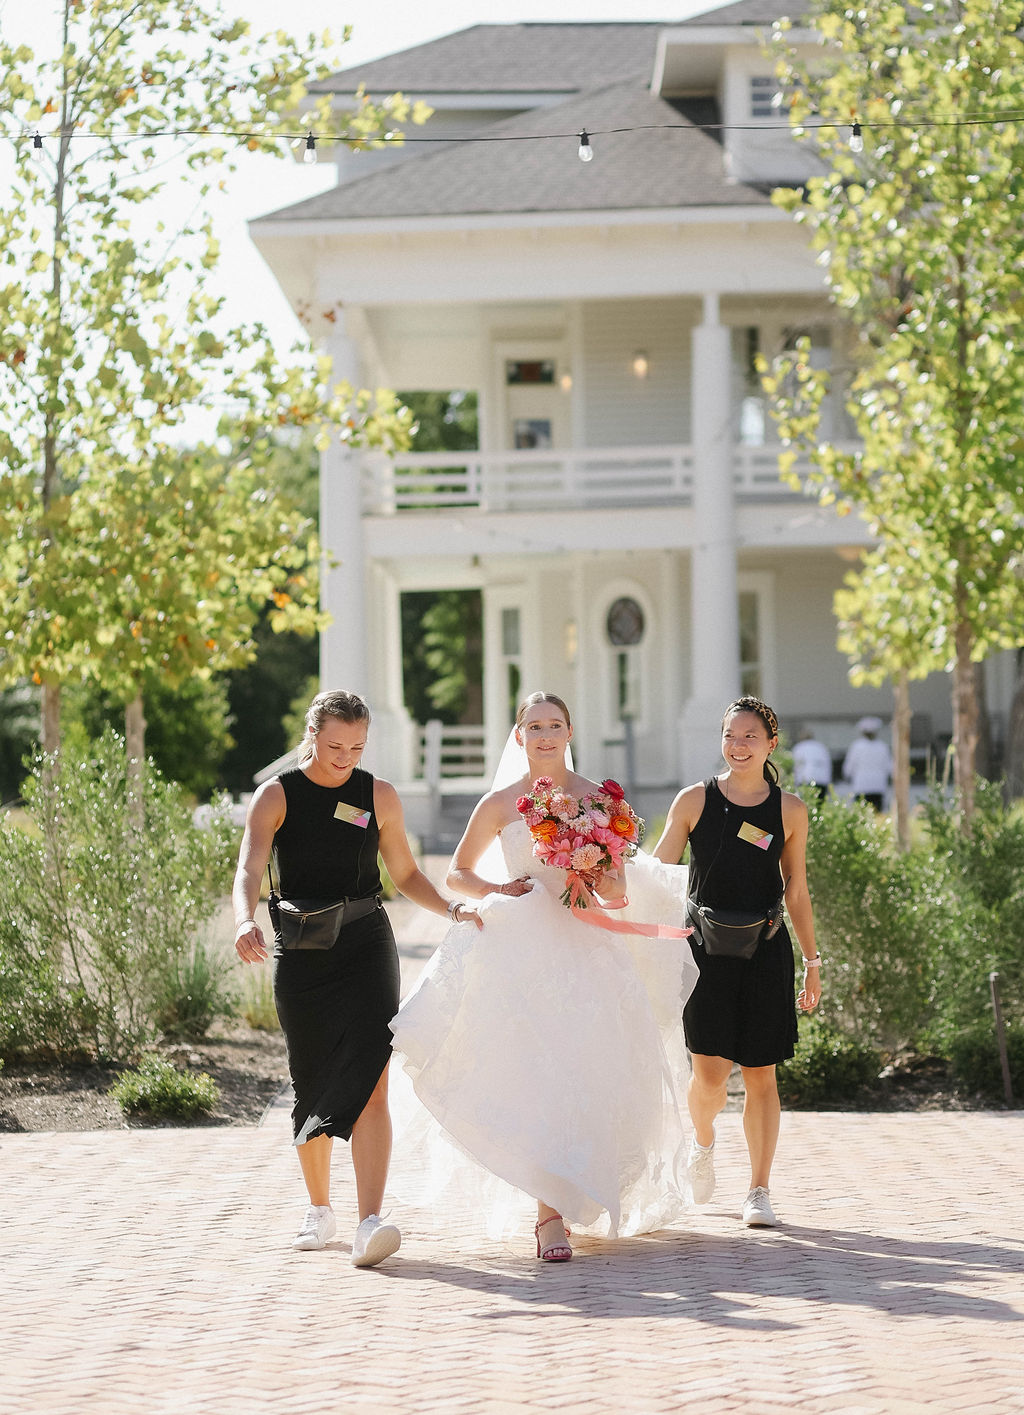 Austin wedding planners carrying bride's train on the way to ceremony